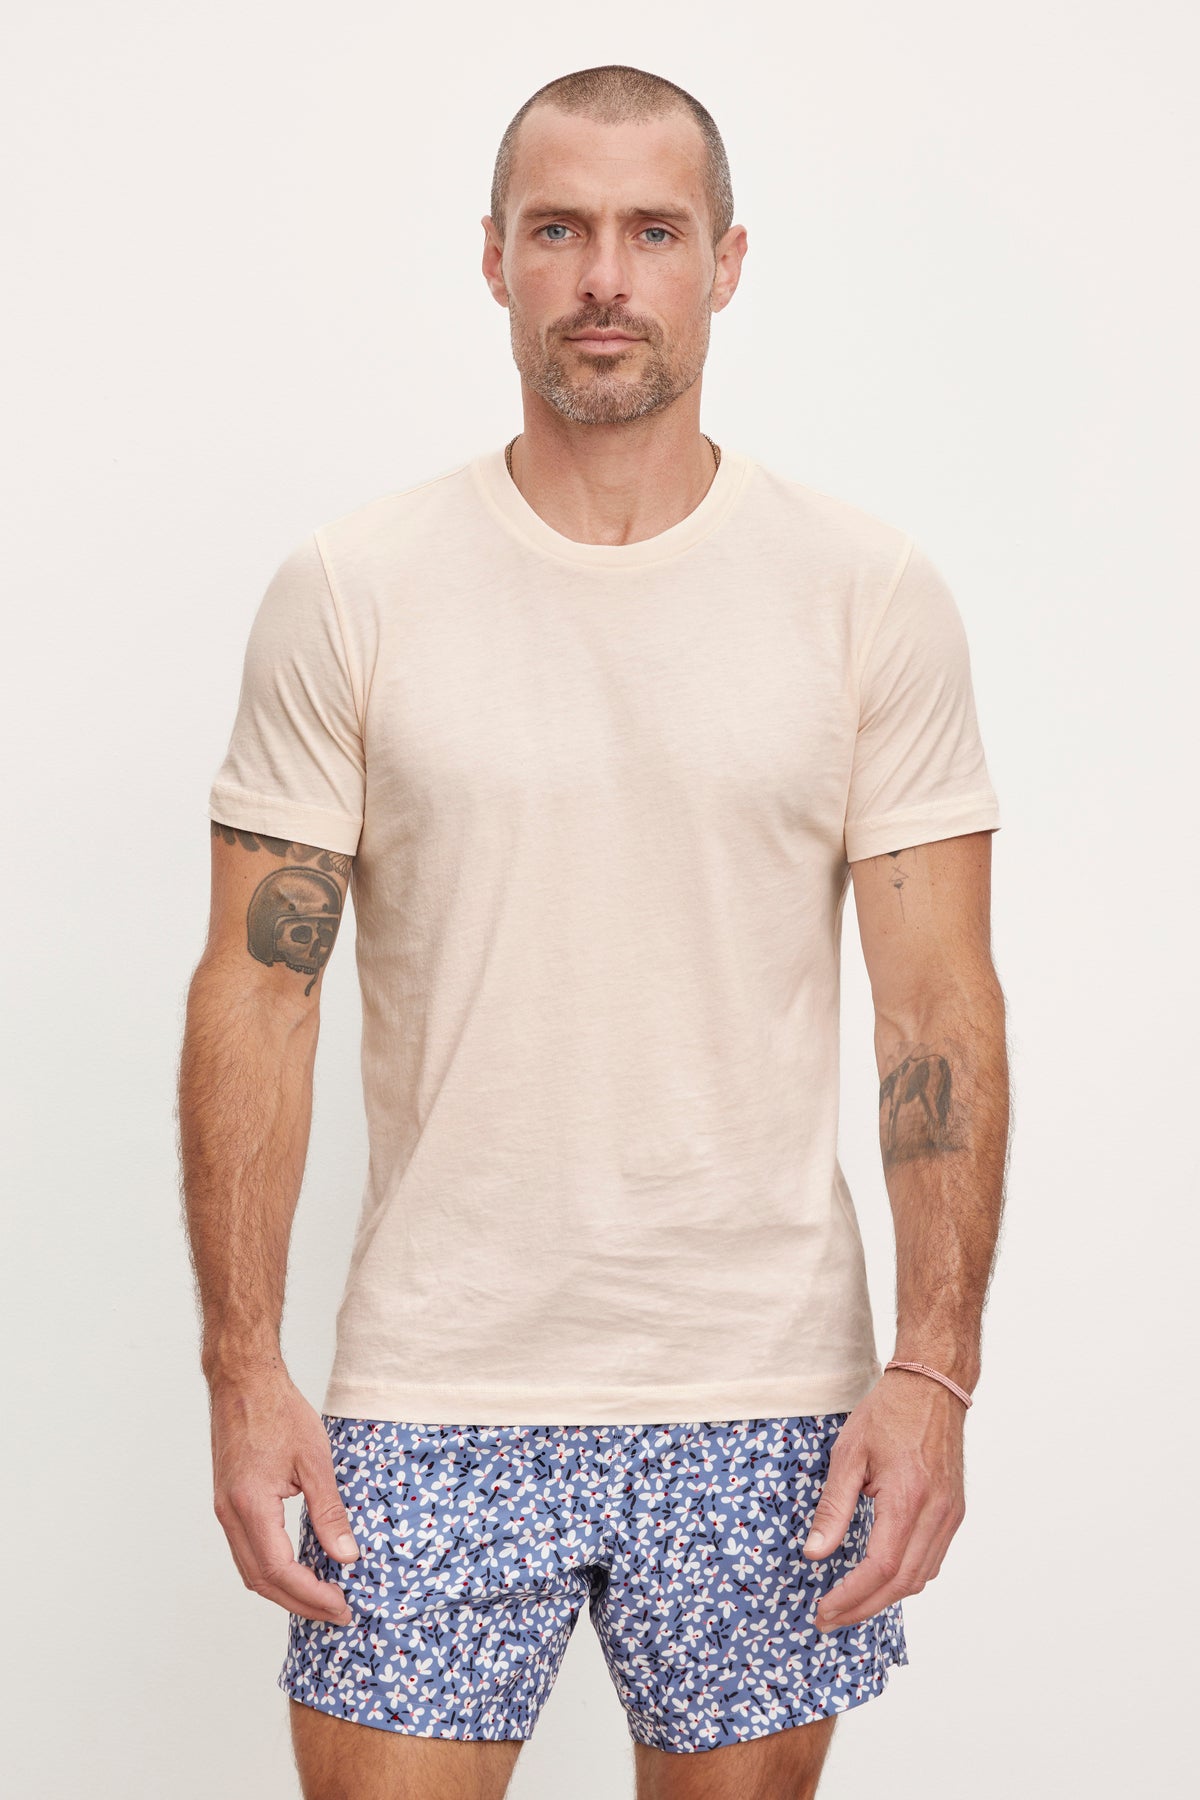 A man with tattoos on his arms wearing a Velvet by Graham & Spencer RANDY CREW NECK TEE and patterned blue shorts against a plain background.-36753568497857